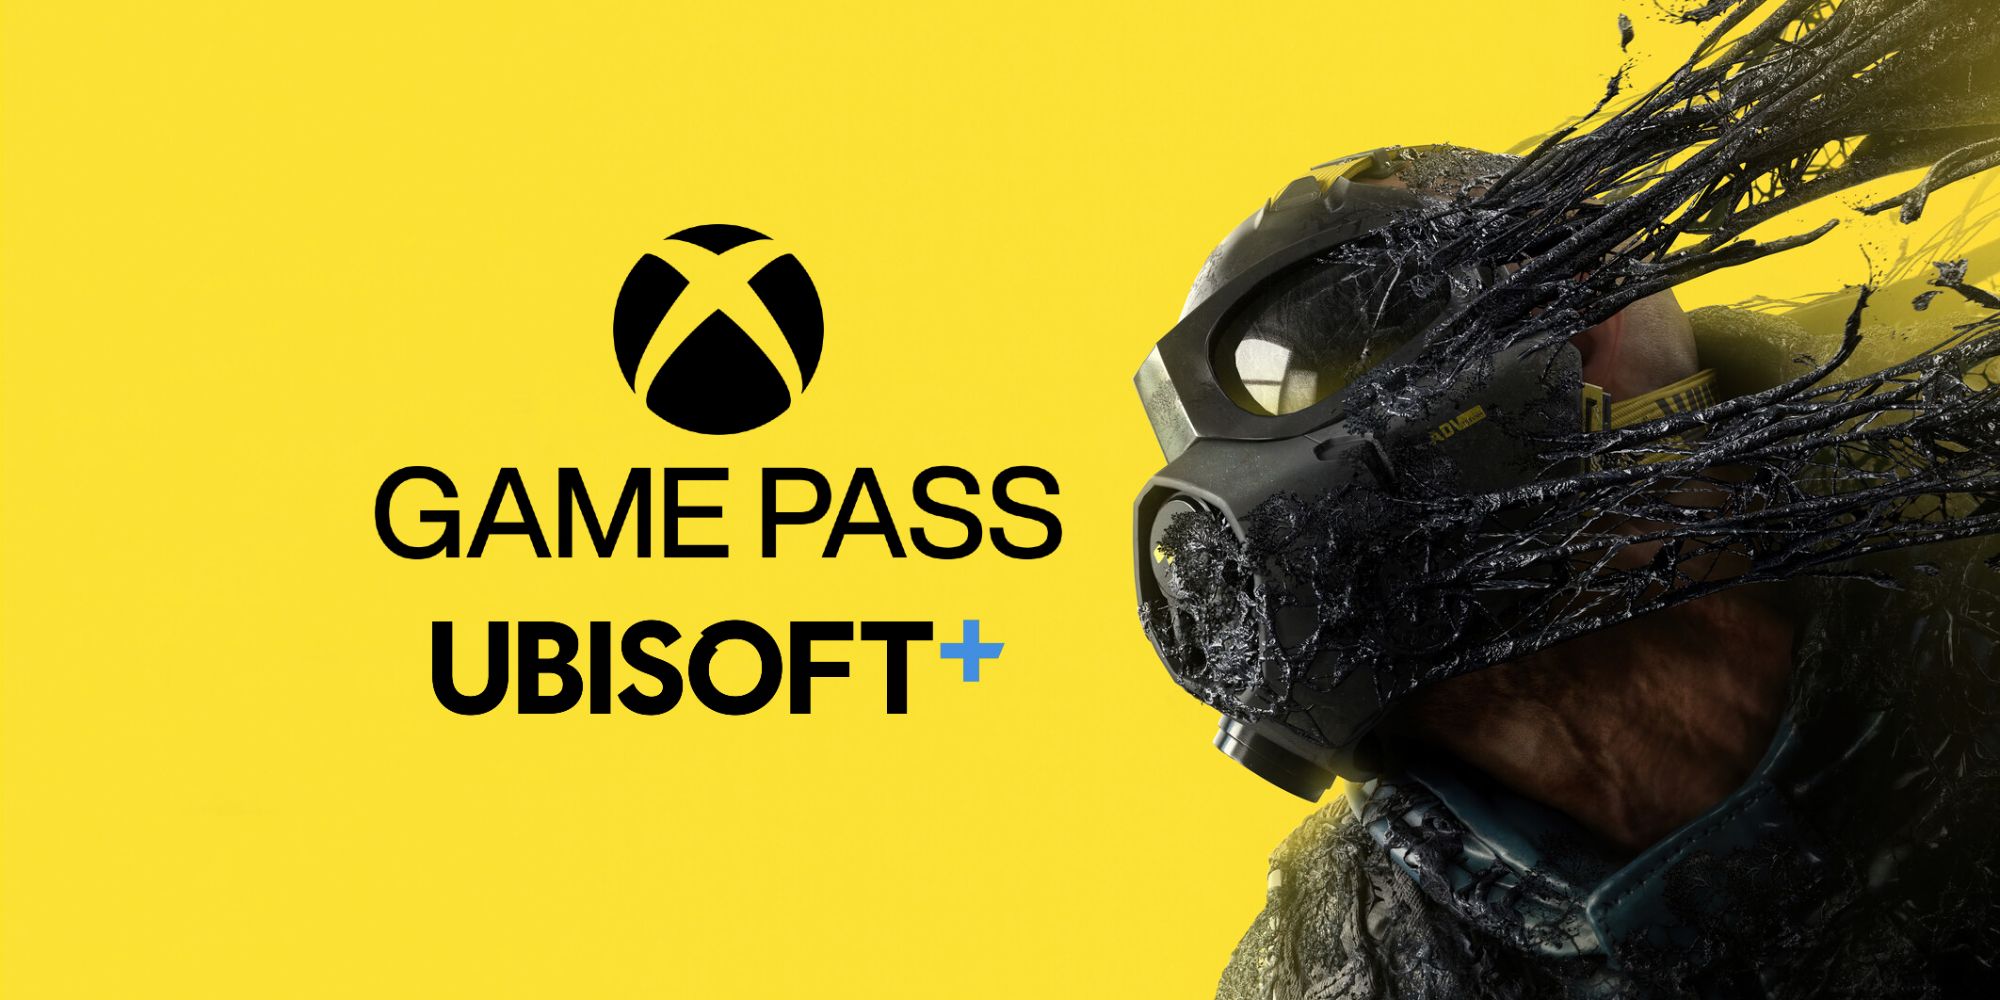 Why Ubisoft+ Isn't Coming To Game Pass (But Rainbow Six Extraction Is)